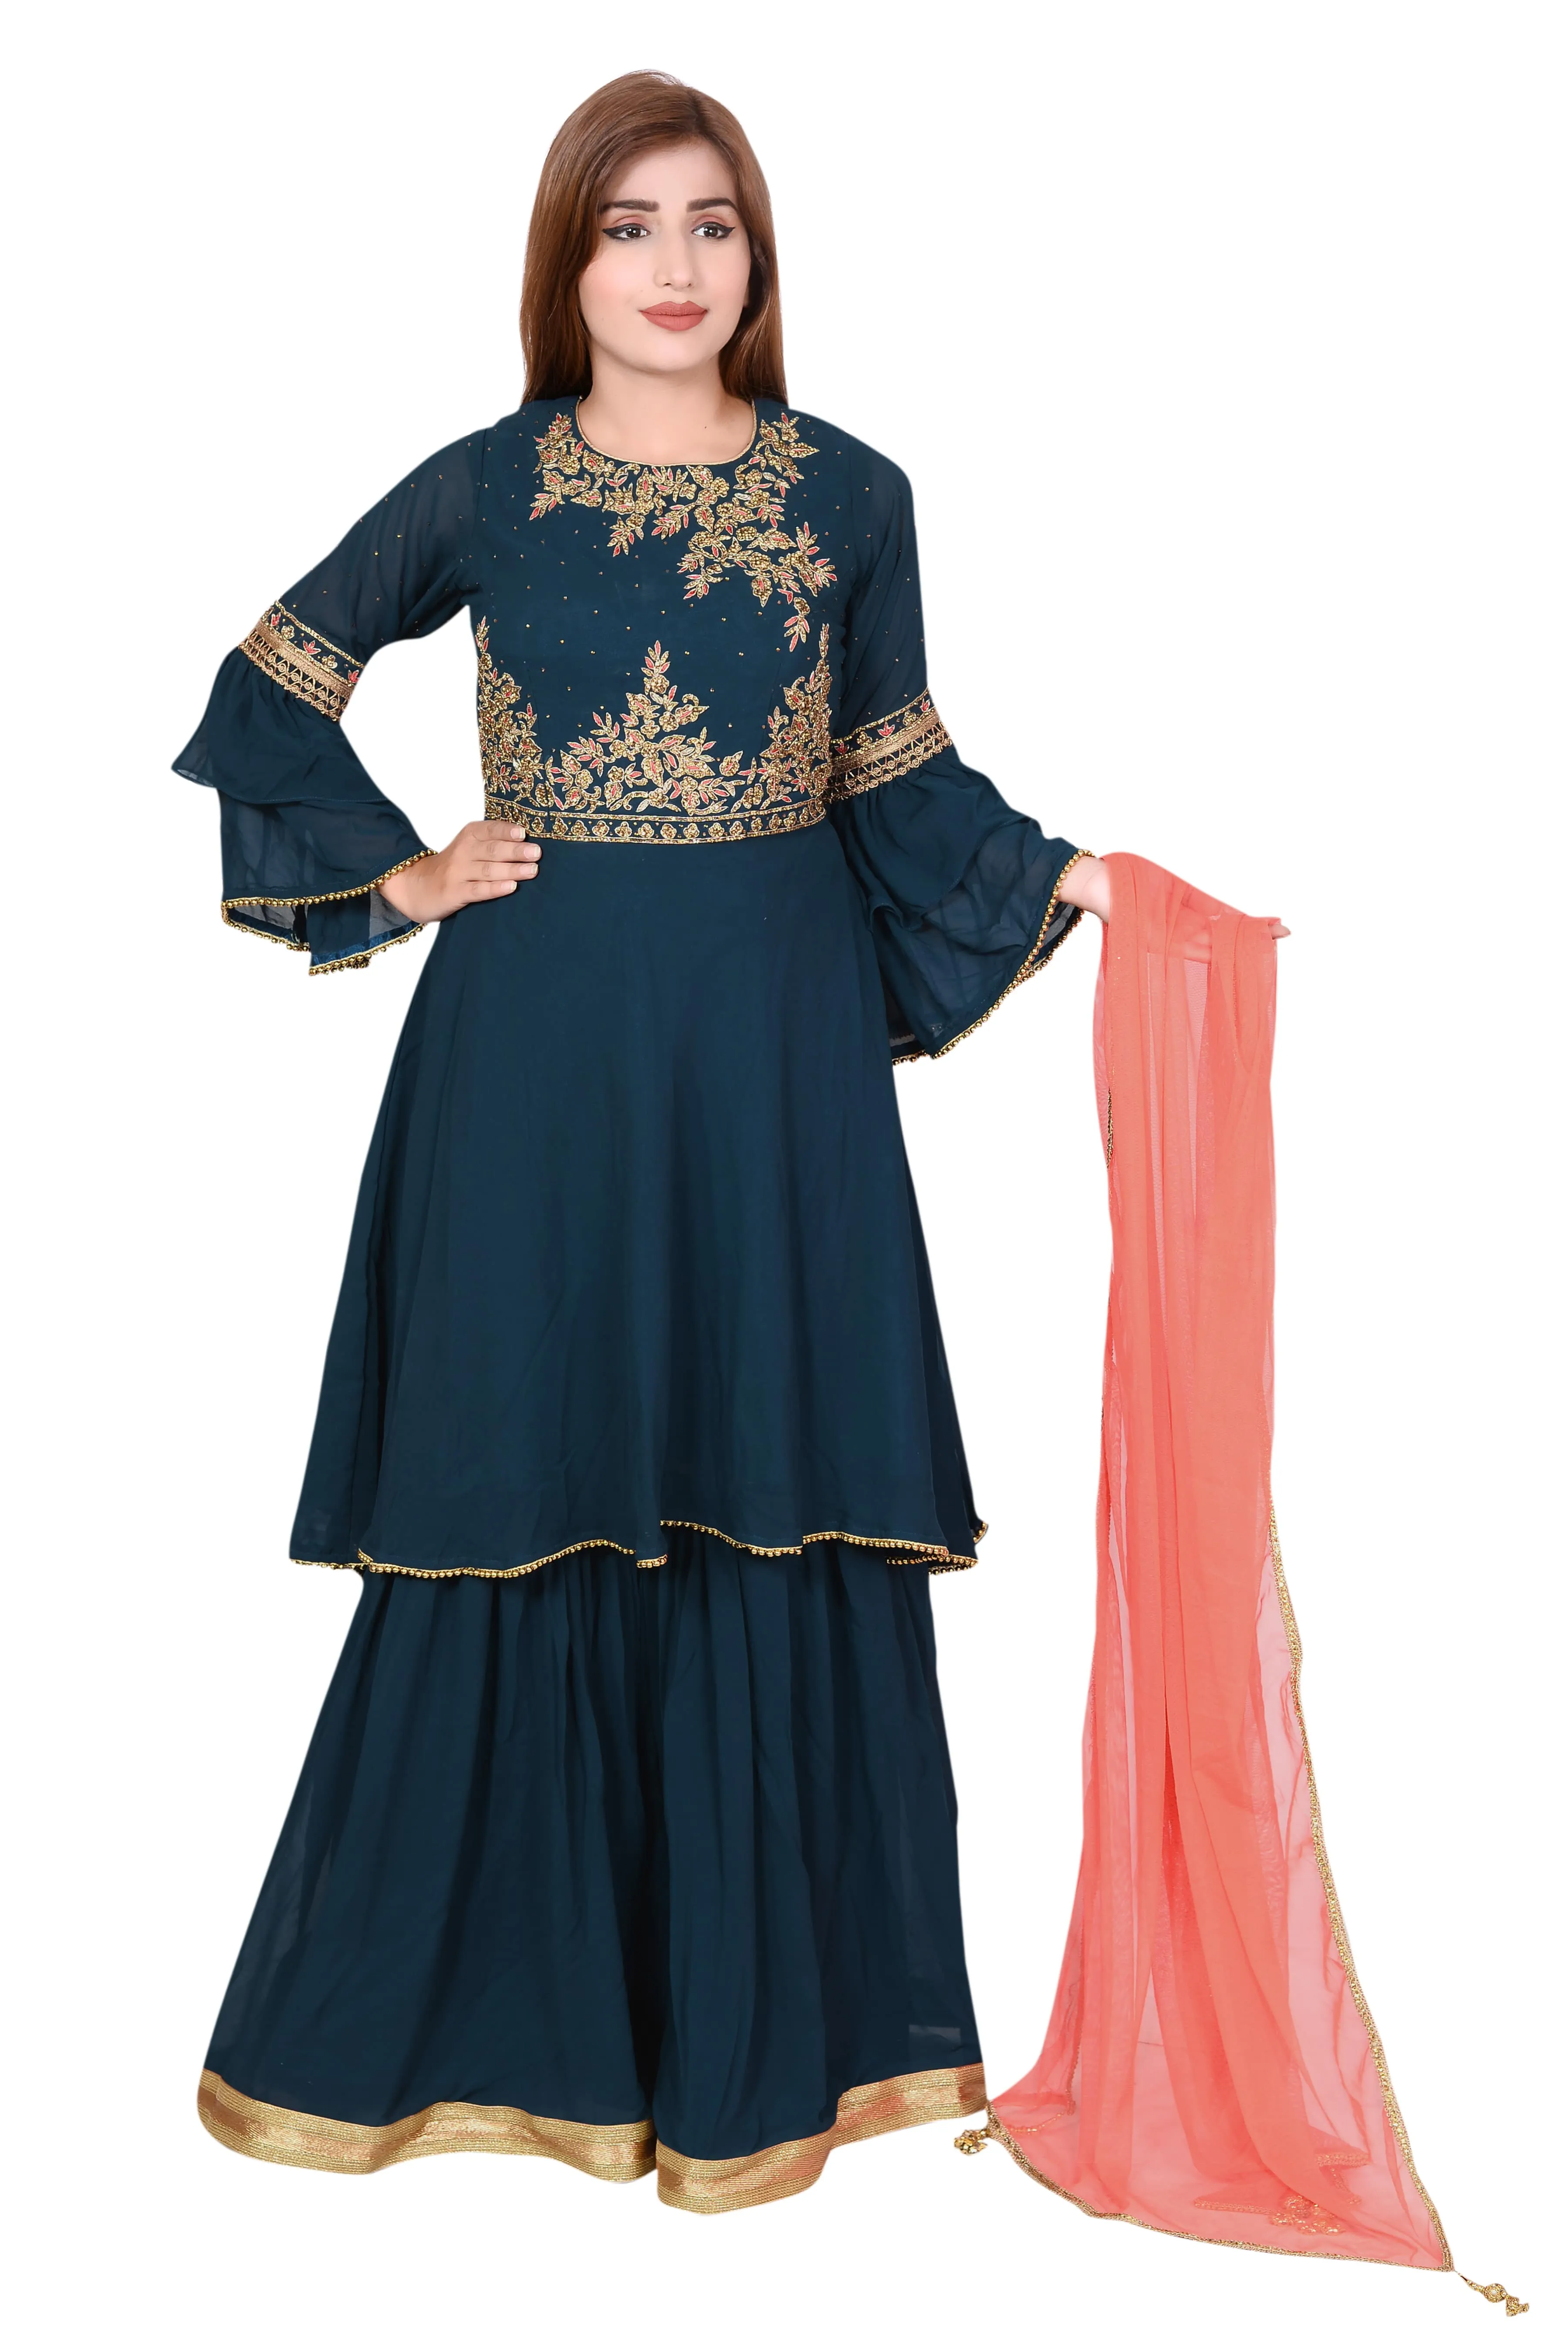 https://www.shreejeesuits.com/images/products/ladies-ethnic-wear.webp